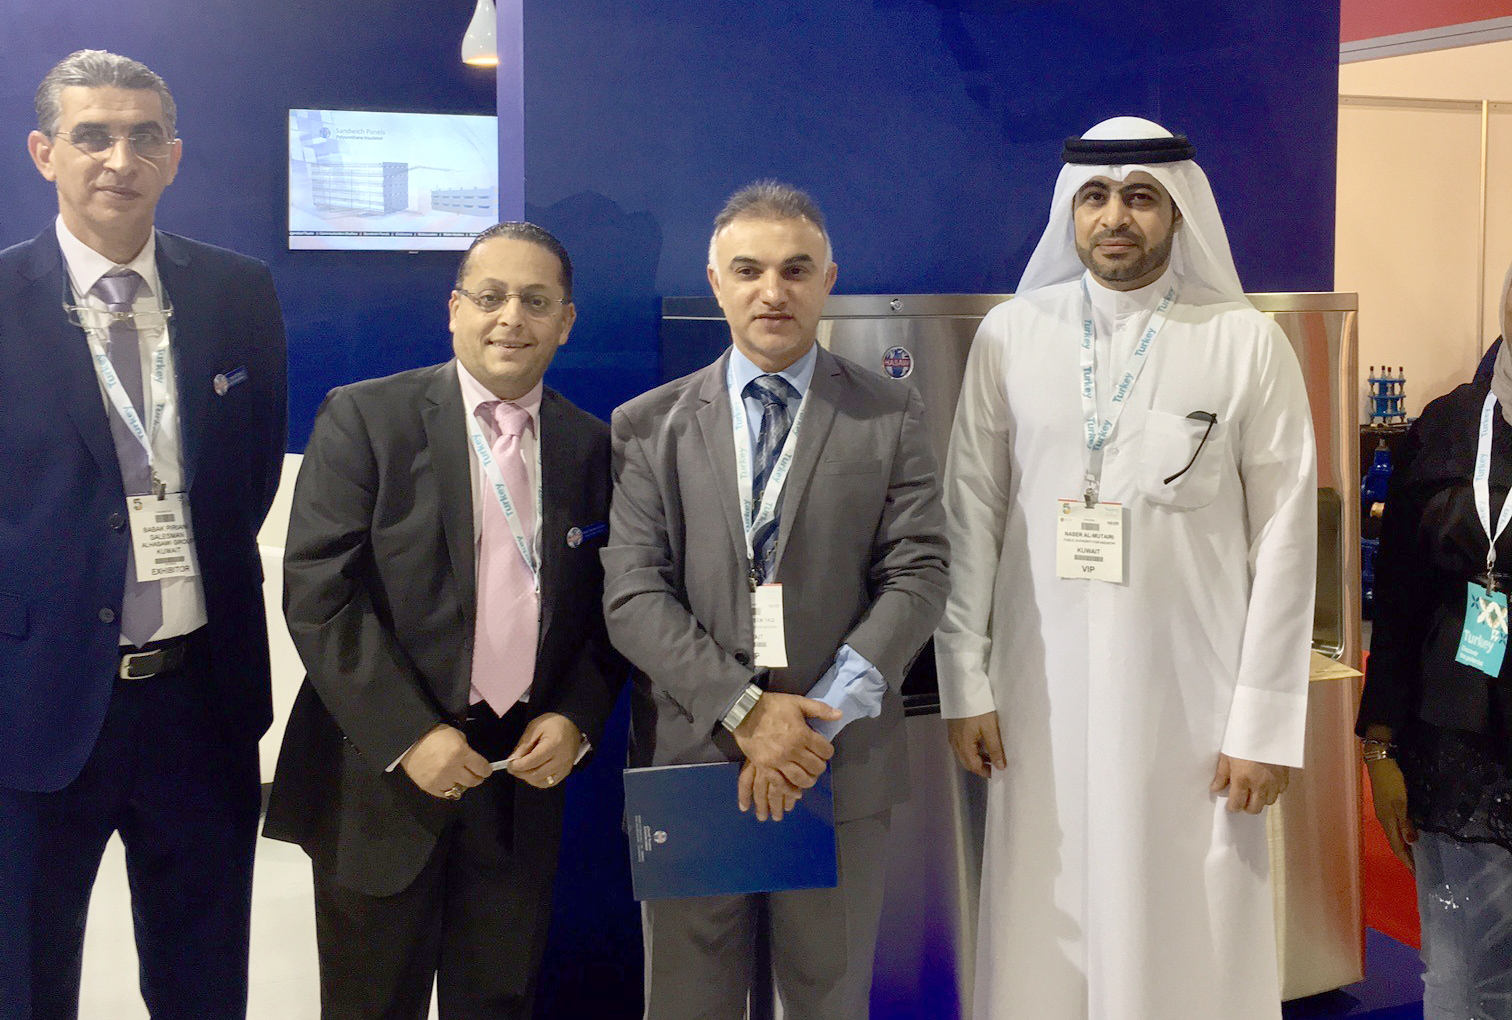 Kuwait's Public Authority for Industry (PAI) delegation on the sidelines of "The Big 5 International Building and Construction Show" in Dubai